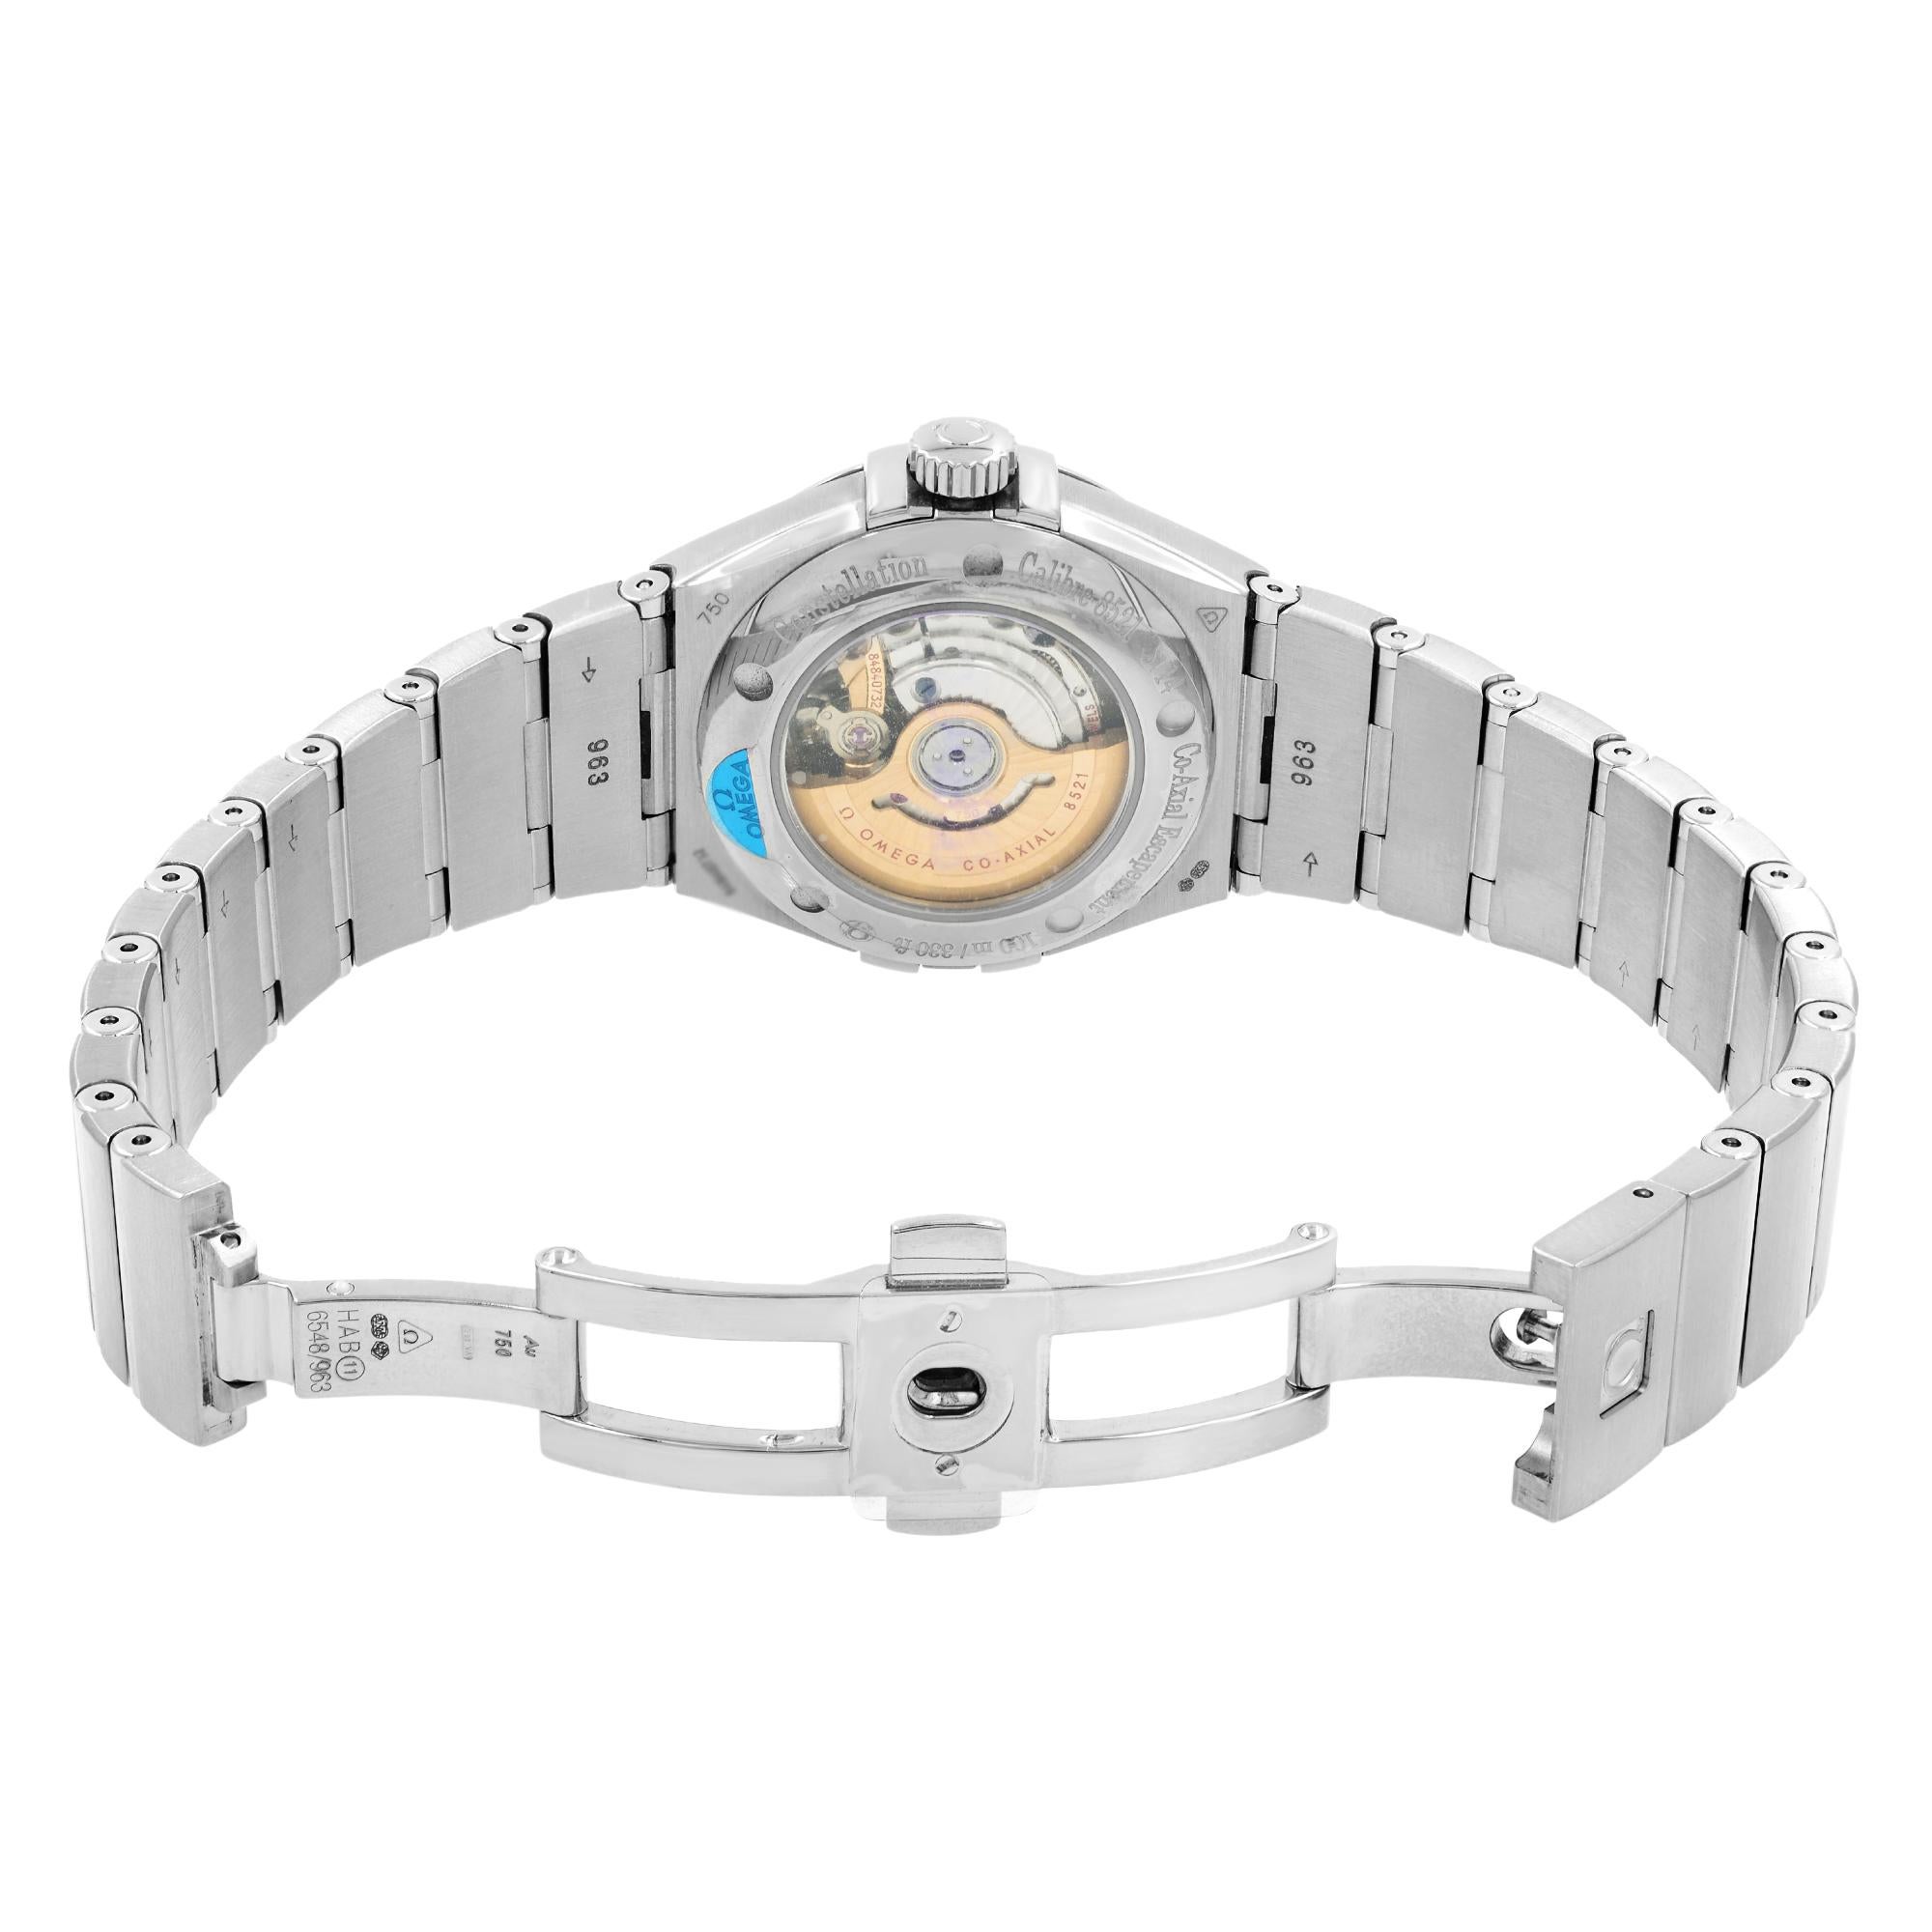 Women's Omega Constellation Silver Diamond White Gold Ladies Watch 123.55.31.20.55.003 For Sale